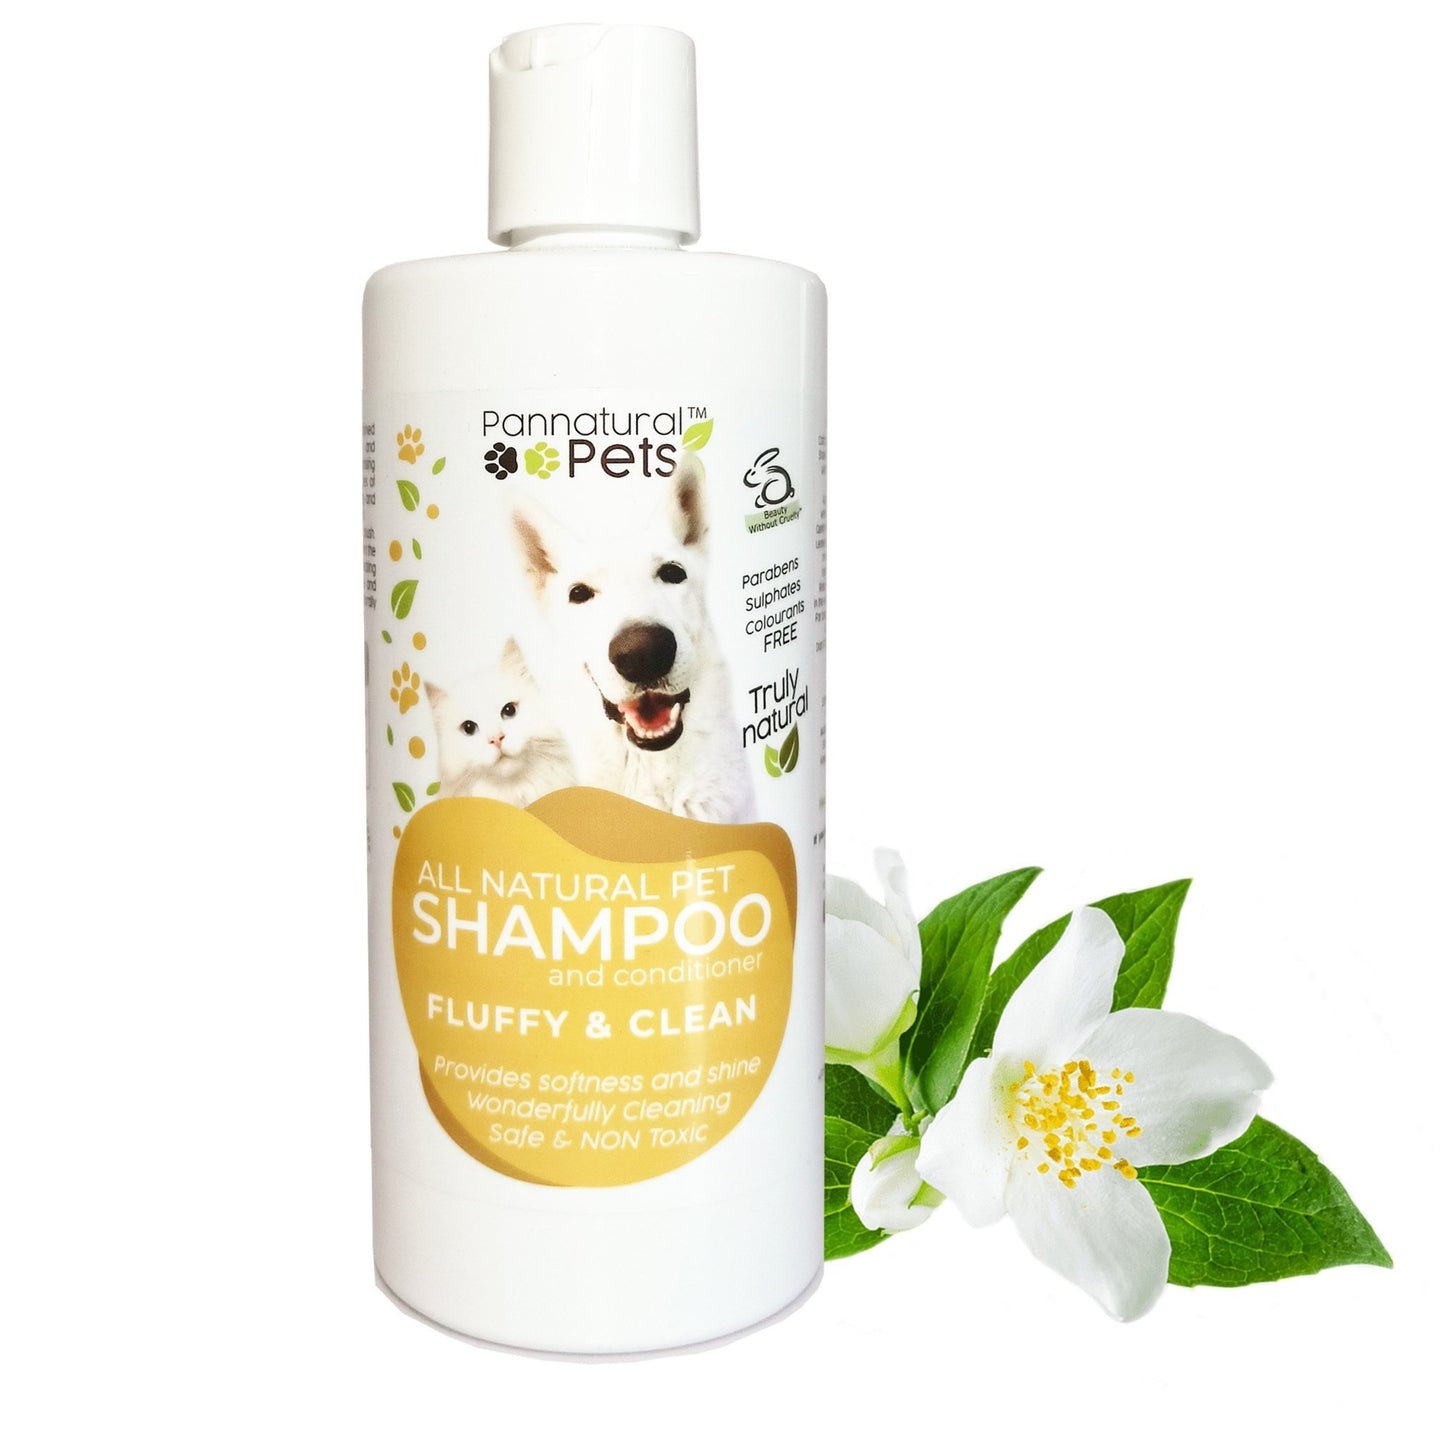 Pannatural Pets Fluffy and Clean Jasmine Shampoo - Shampoo and Conditioners